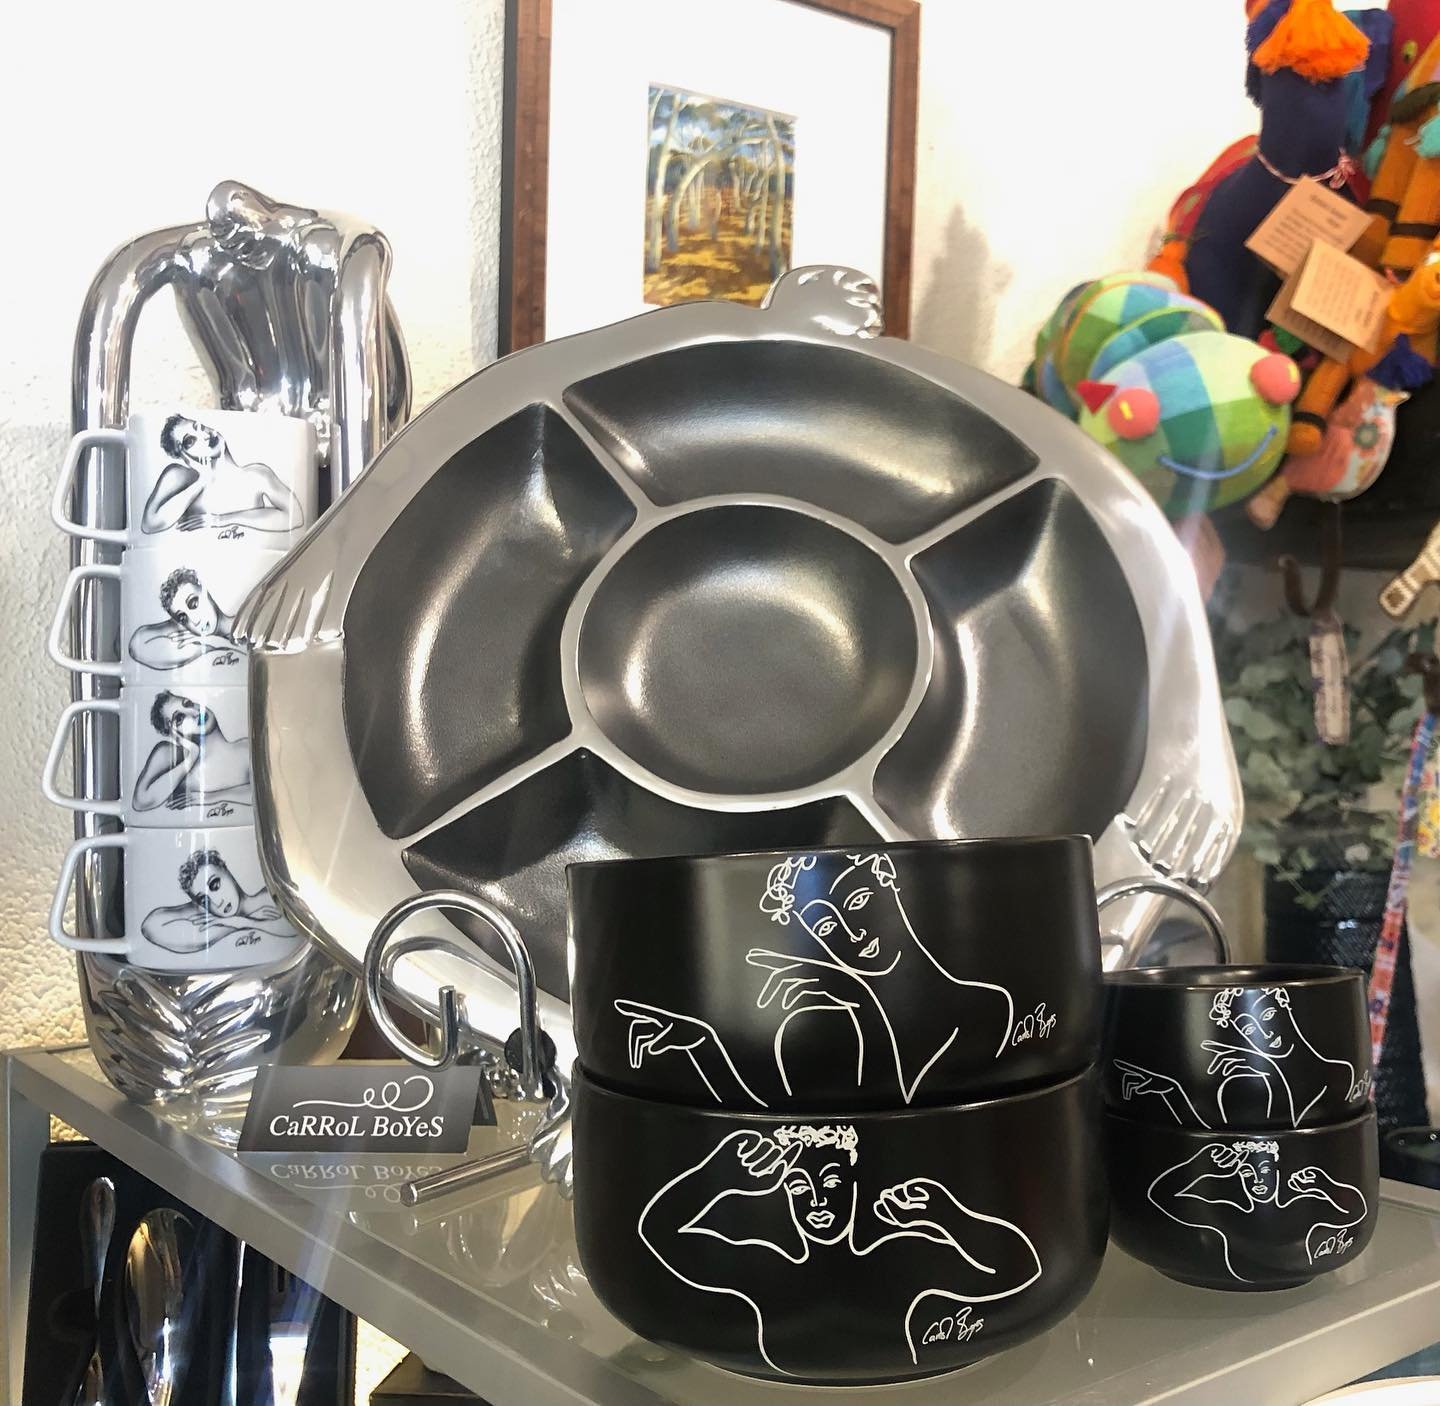 Serve up only the good stuff this Mothers Day with Carrol Boyes functional art. Fit for any table, loved by every mum. 

#alburypictureframers #alburywodonga #alburyframing #alburyframer #alburygiftstore #amplane #alburygifts #ontheborder #carrolboye